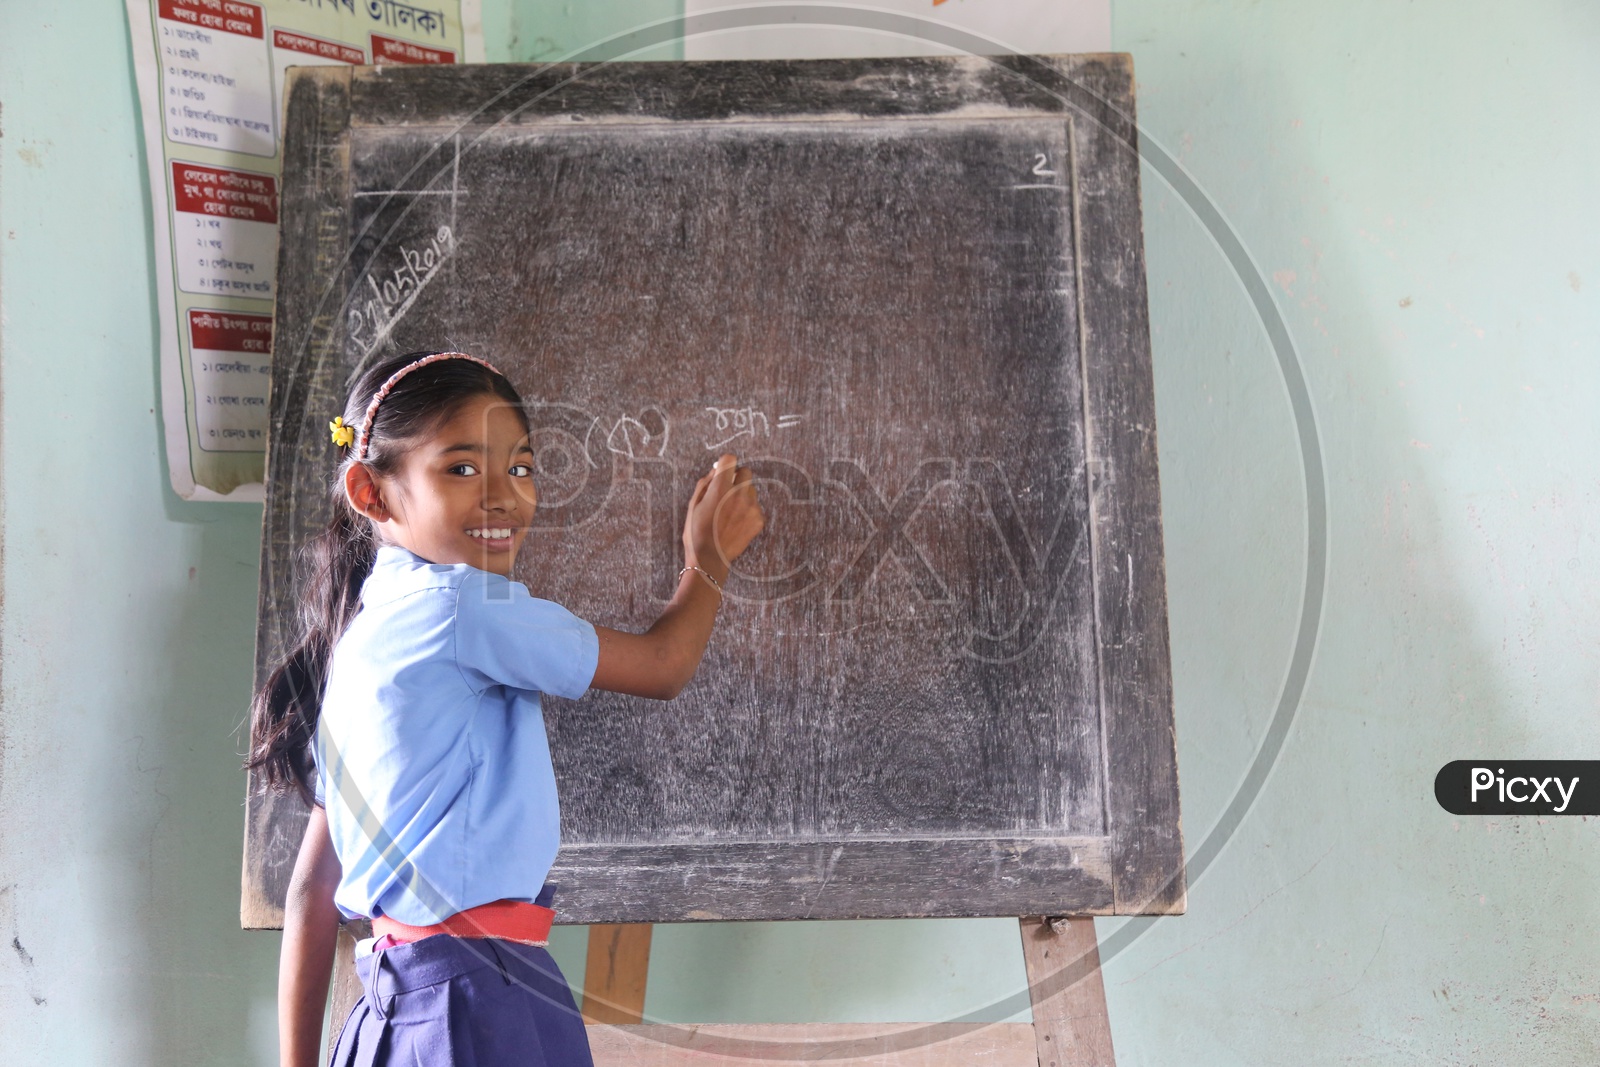 A  Girl Student  Writing On The  School Blackboard in A Classroom